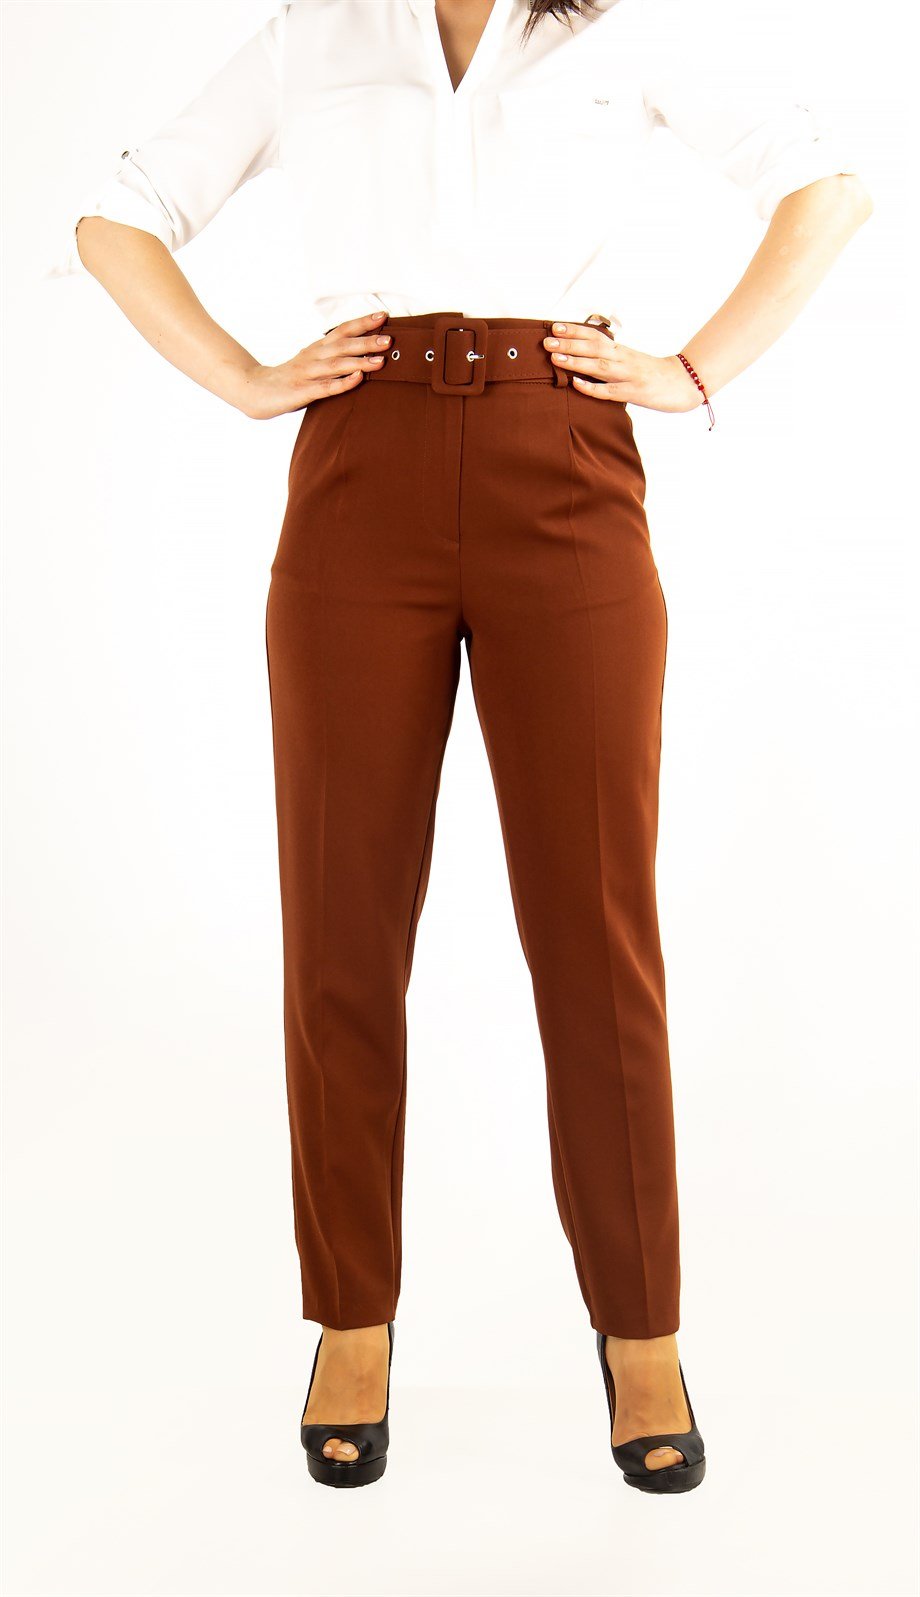 Casual Formal Office Trousers For Ladies Pants With Matching Belt - Brick  Red - Wholesale Womens Clothing Vendors For Boutiques